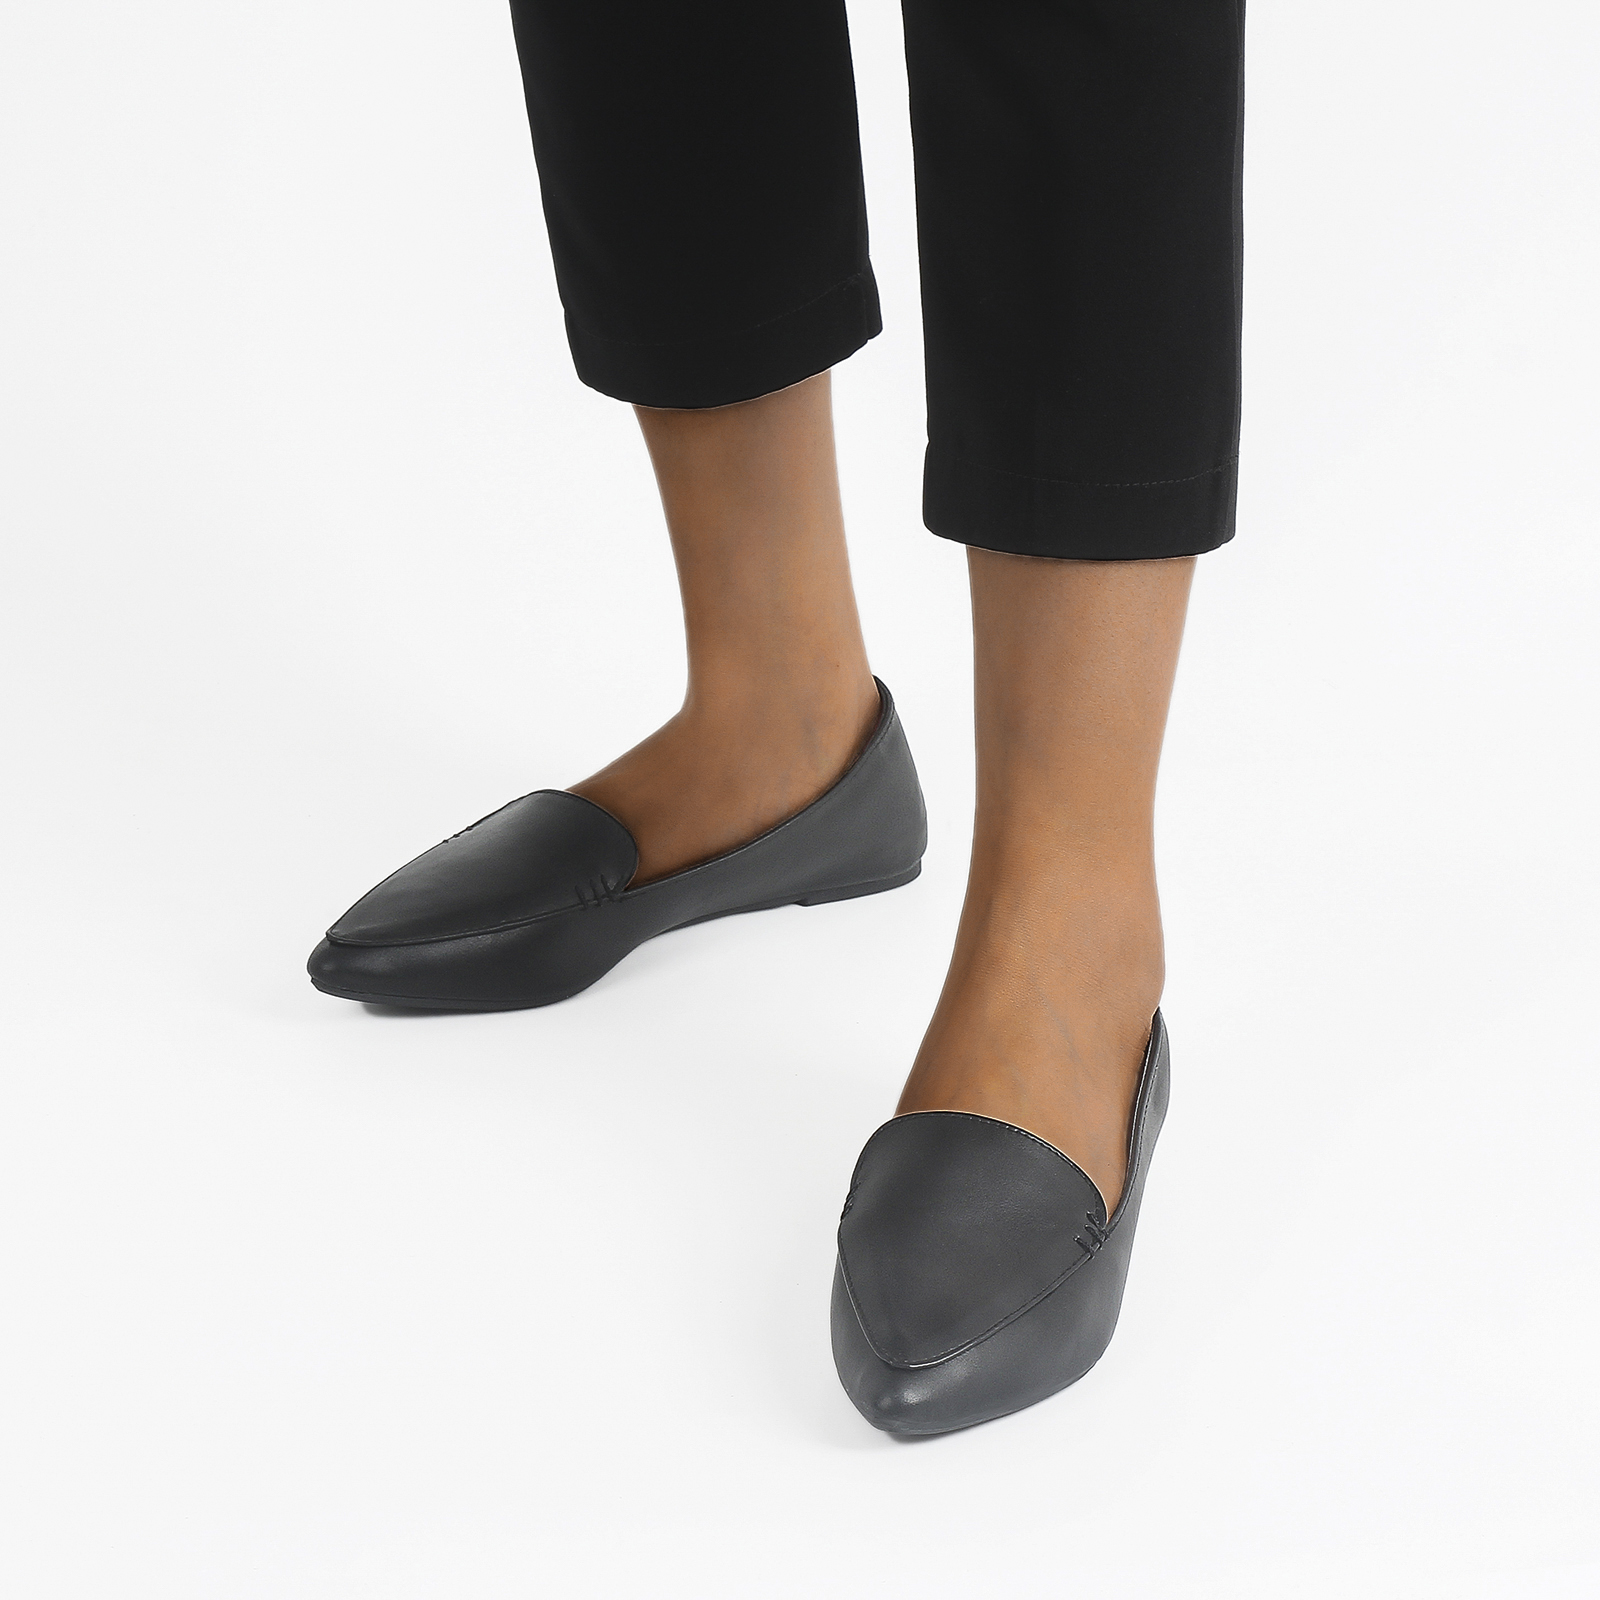 MUSSHOE Loafers & Slip-ons Flats